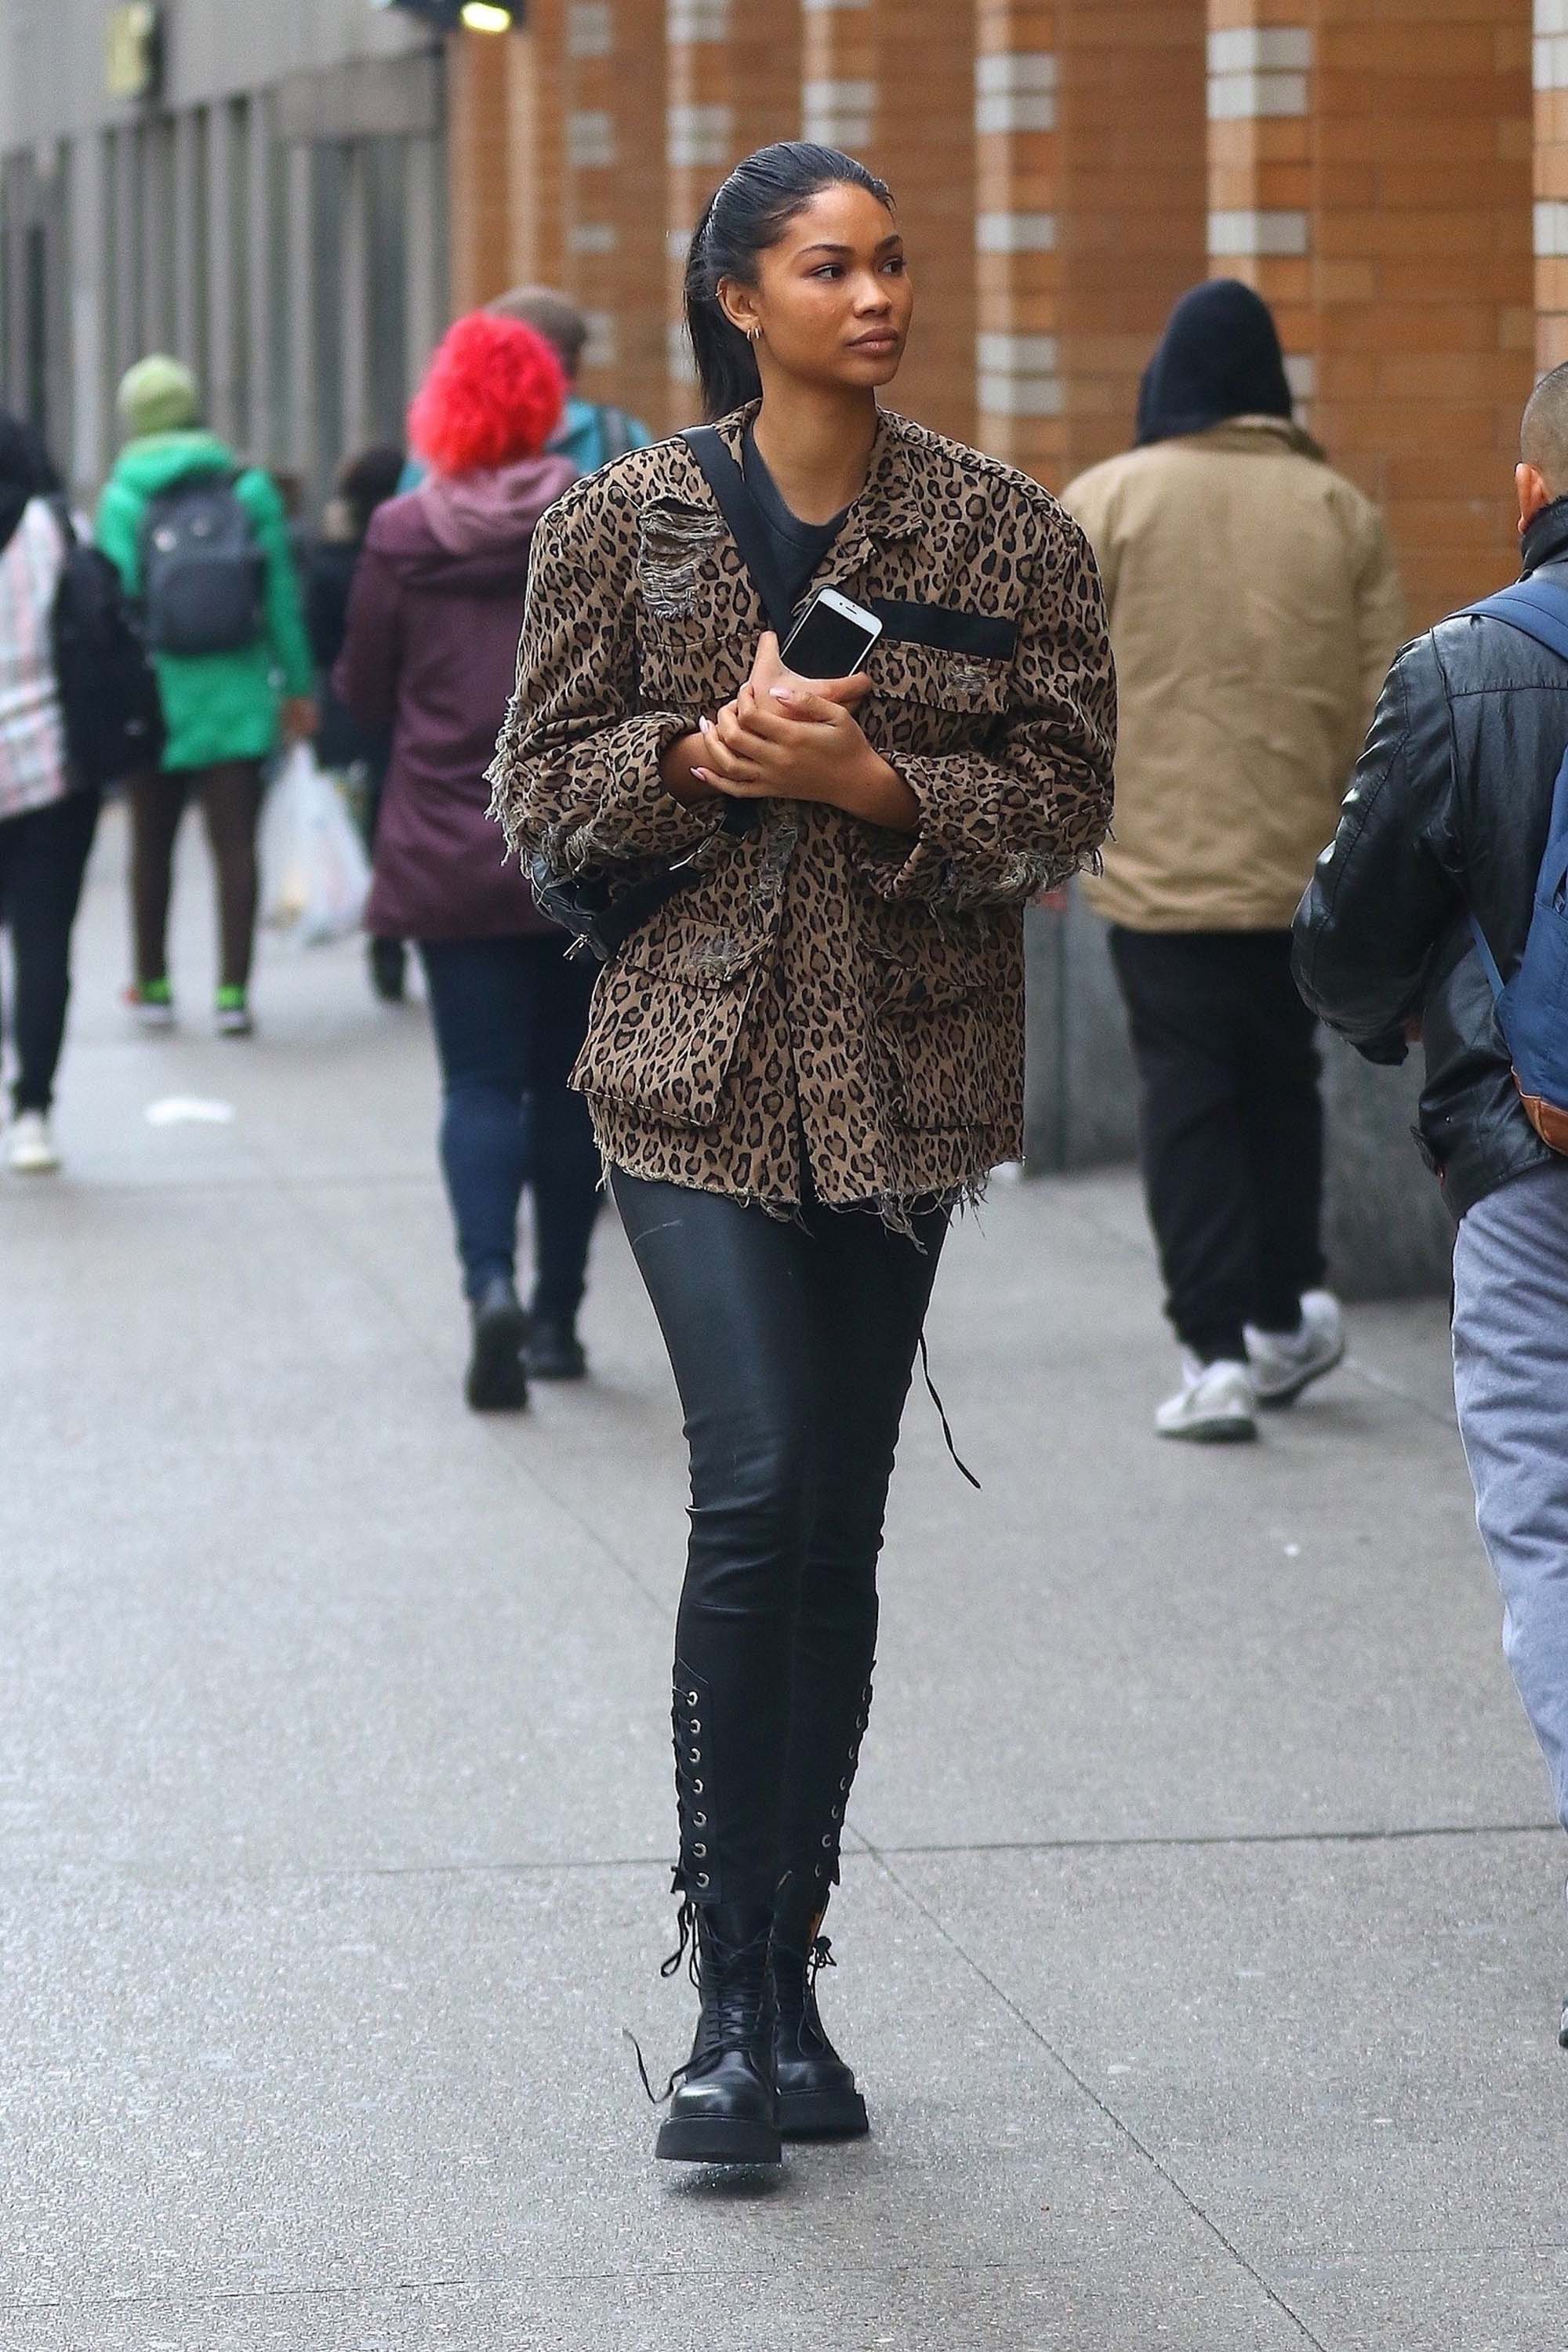 Chanel Iman out in NYC